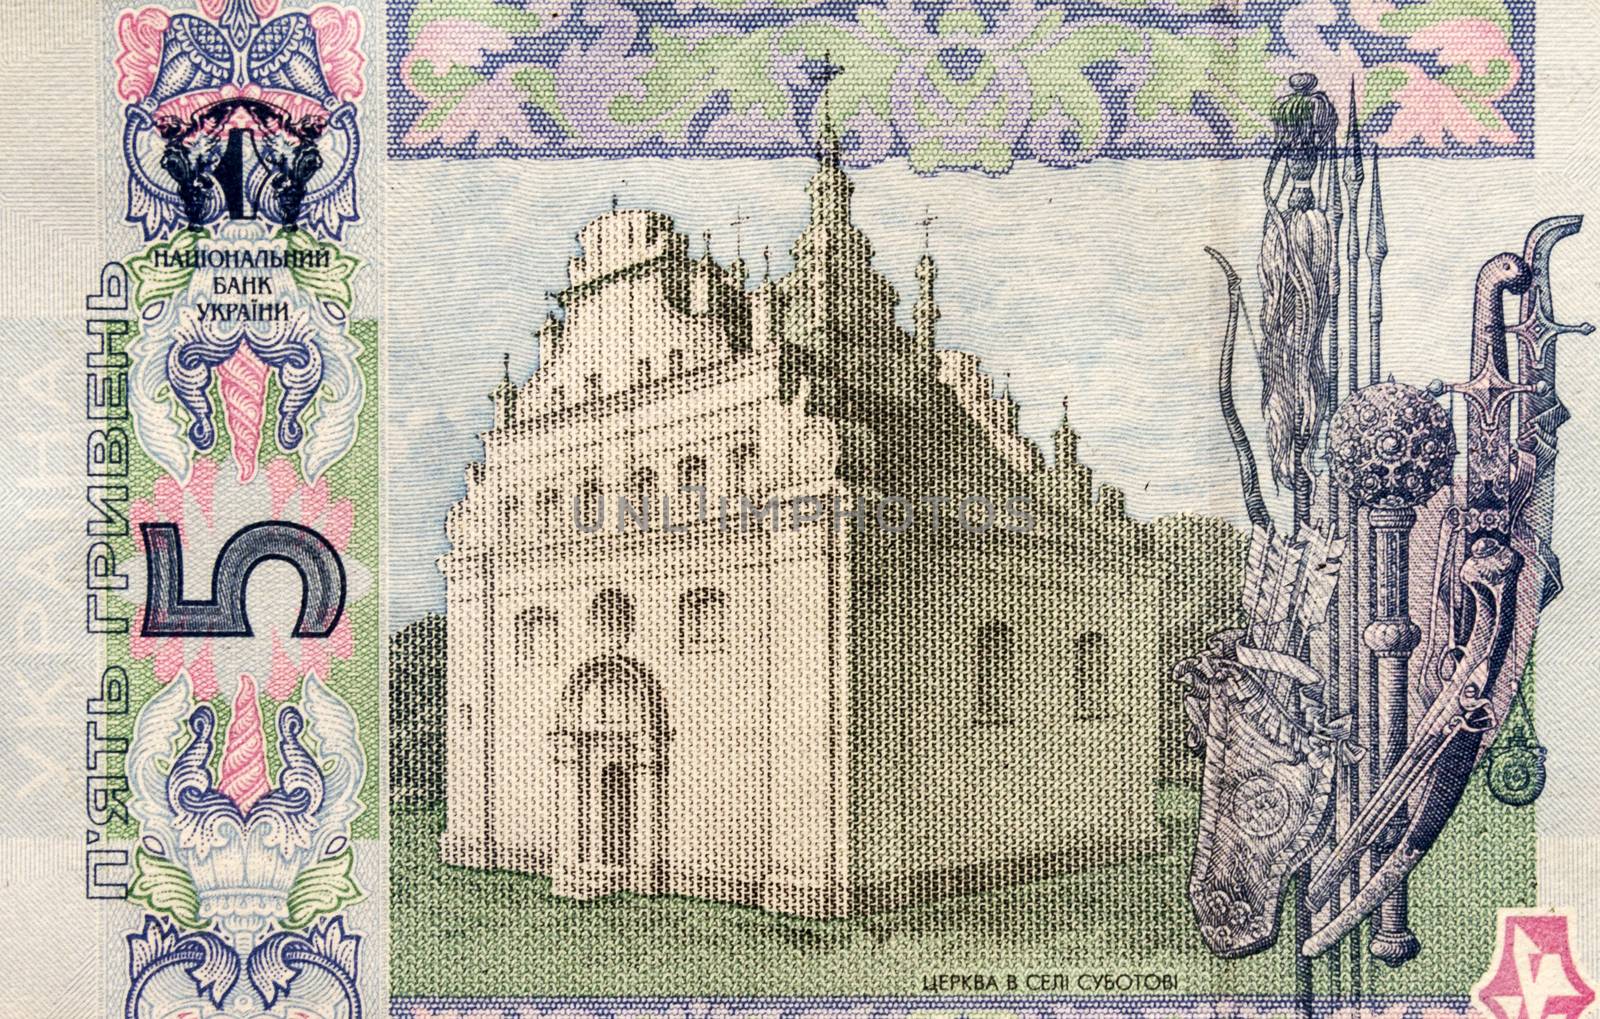 Part of the image on a banknote five hryvnia National Bank of Uk by Grommik